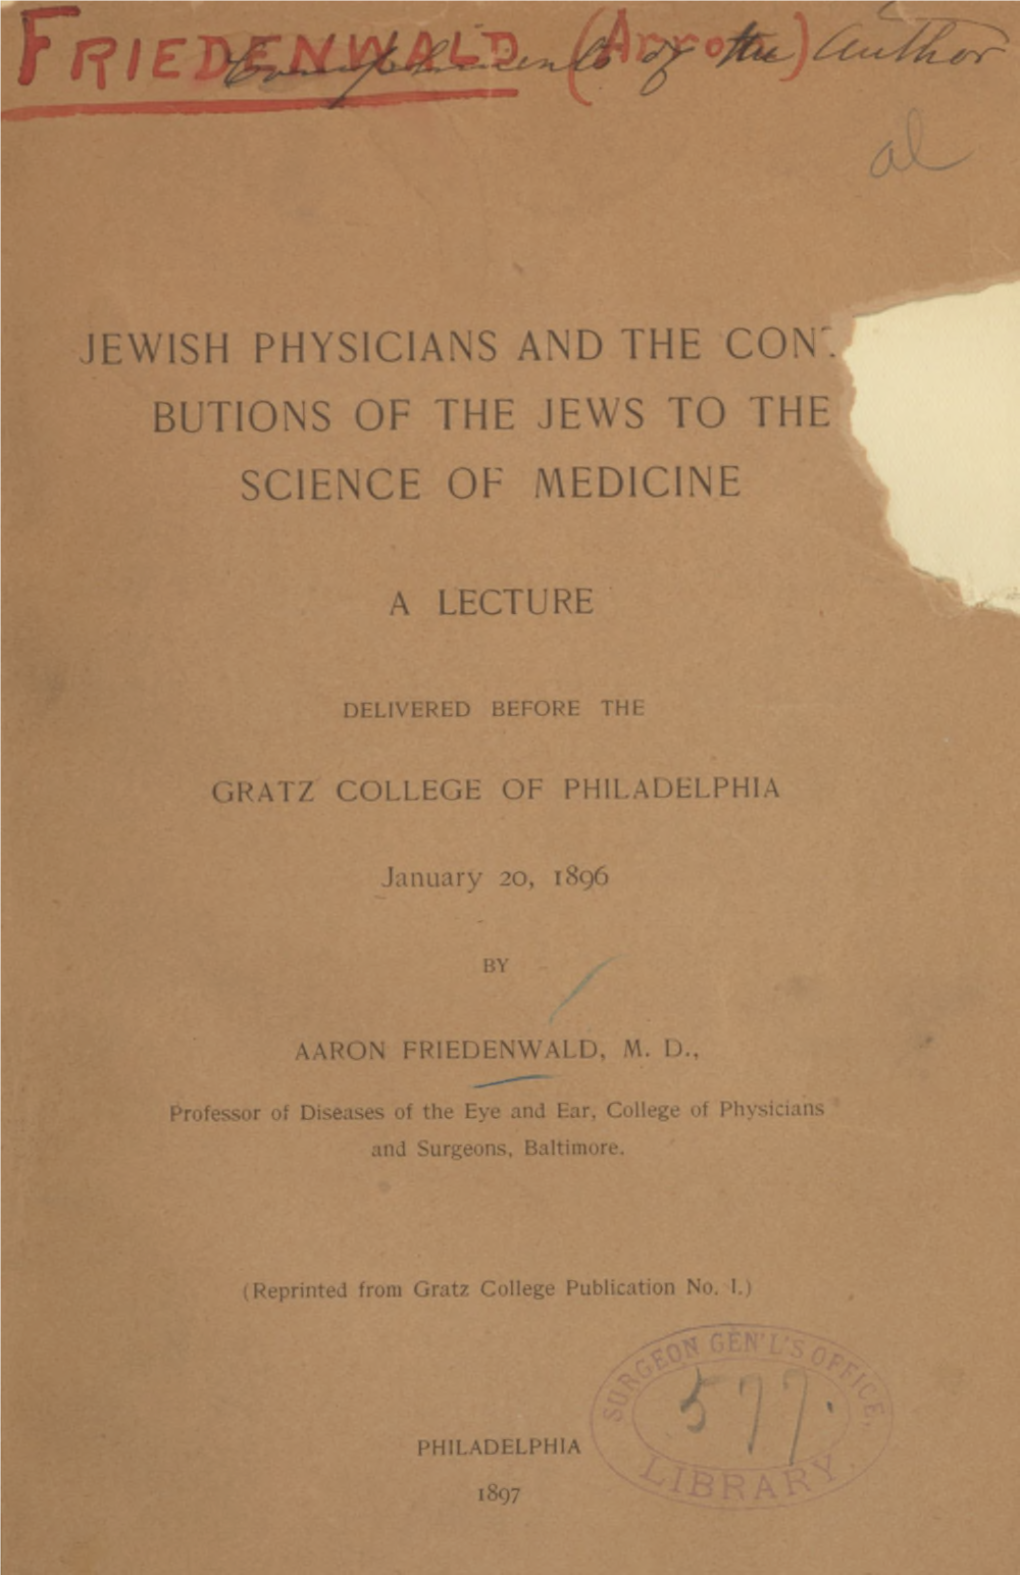 Jewish Physicians and the Contributions of the Jews to The